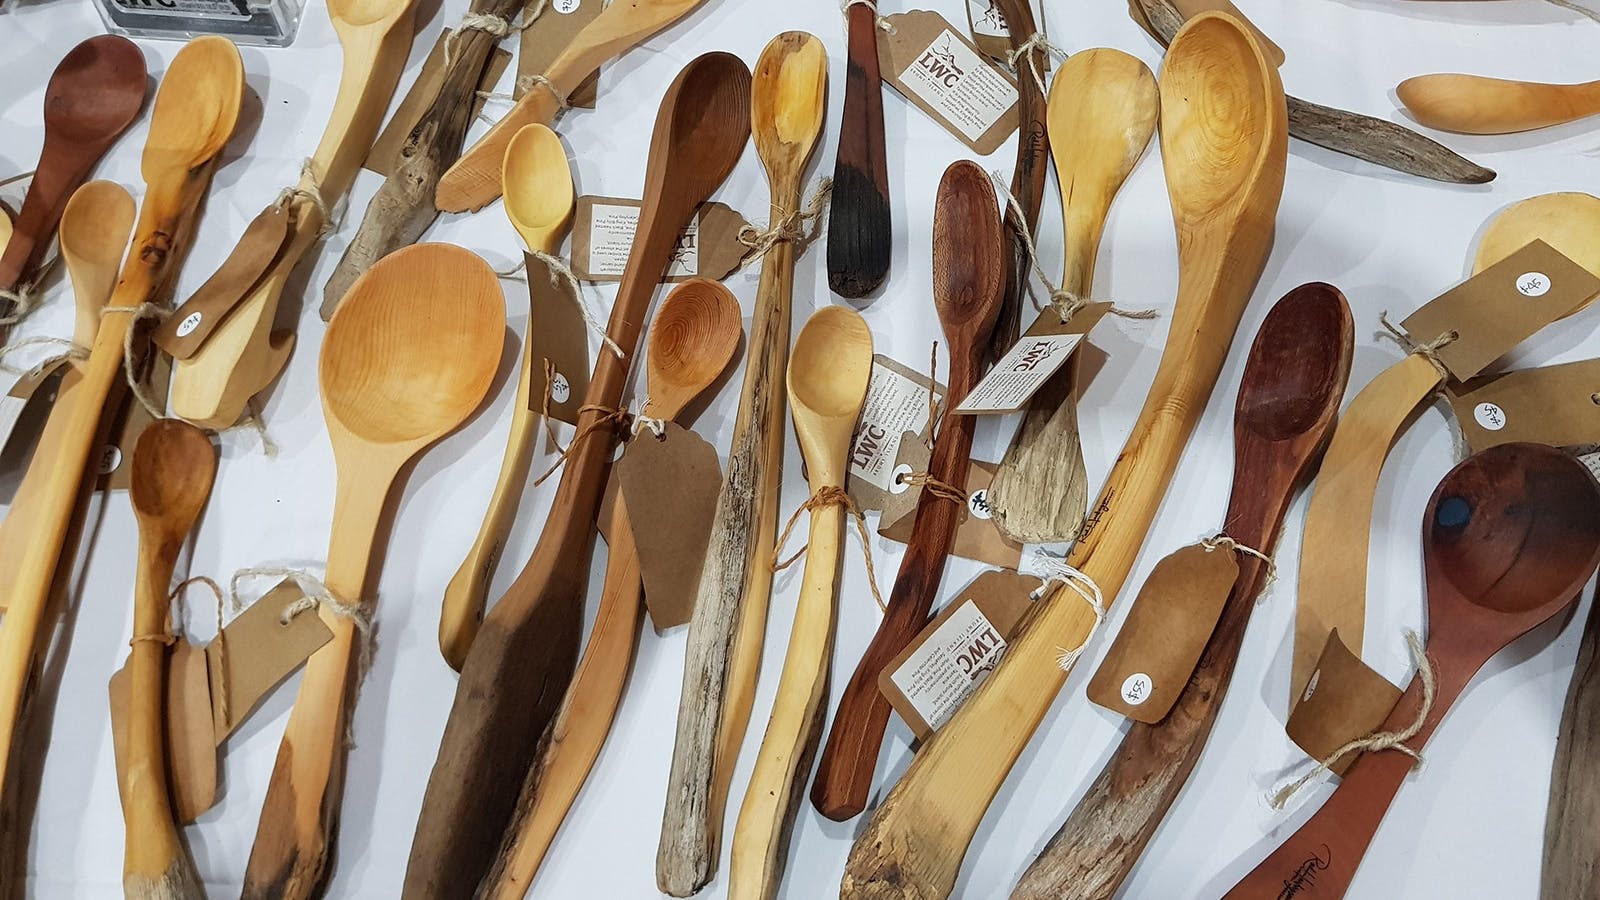 Unique hand carved wooden spoons by Landfall Woodcraft